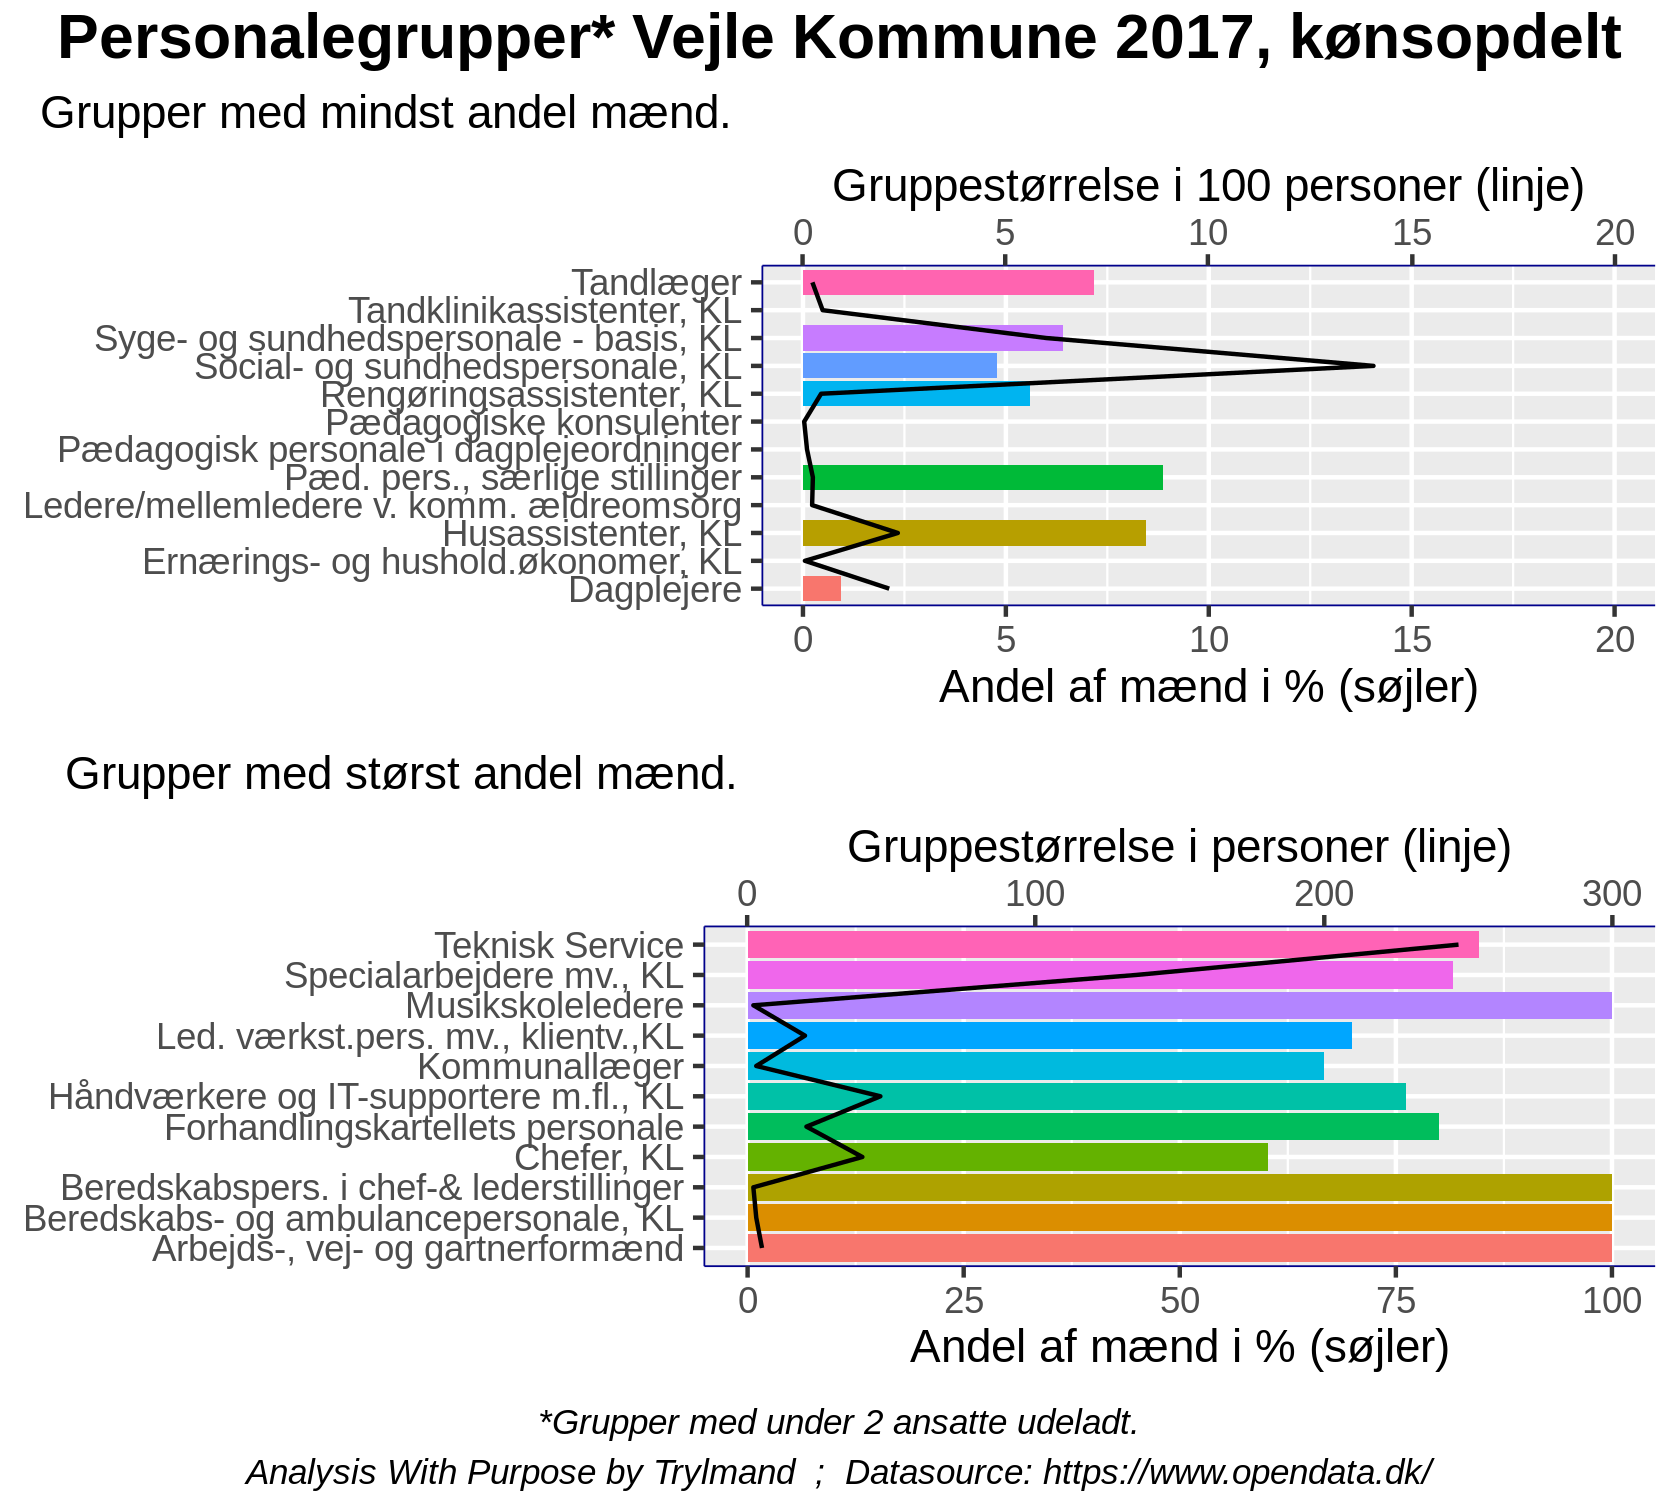 Employees Vejle Kommune largest and smallest groups containing male employees